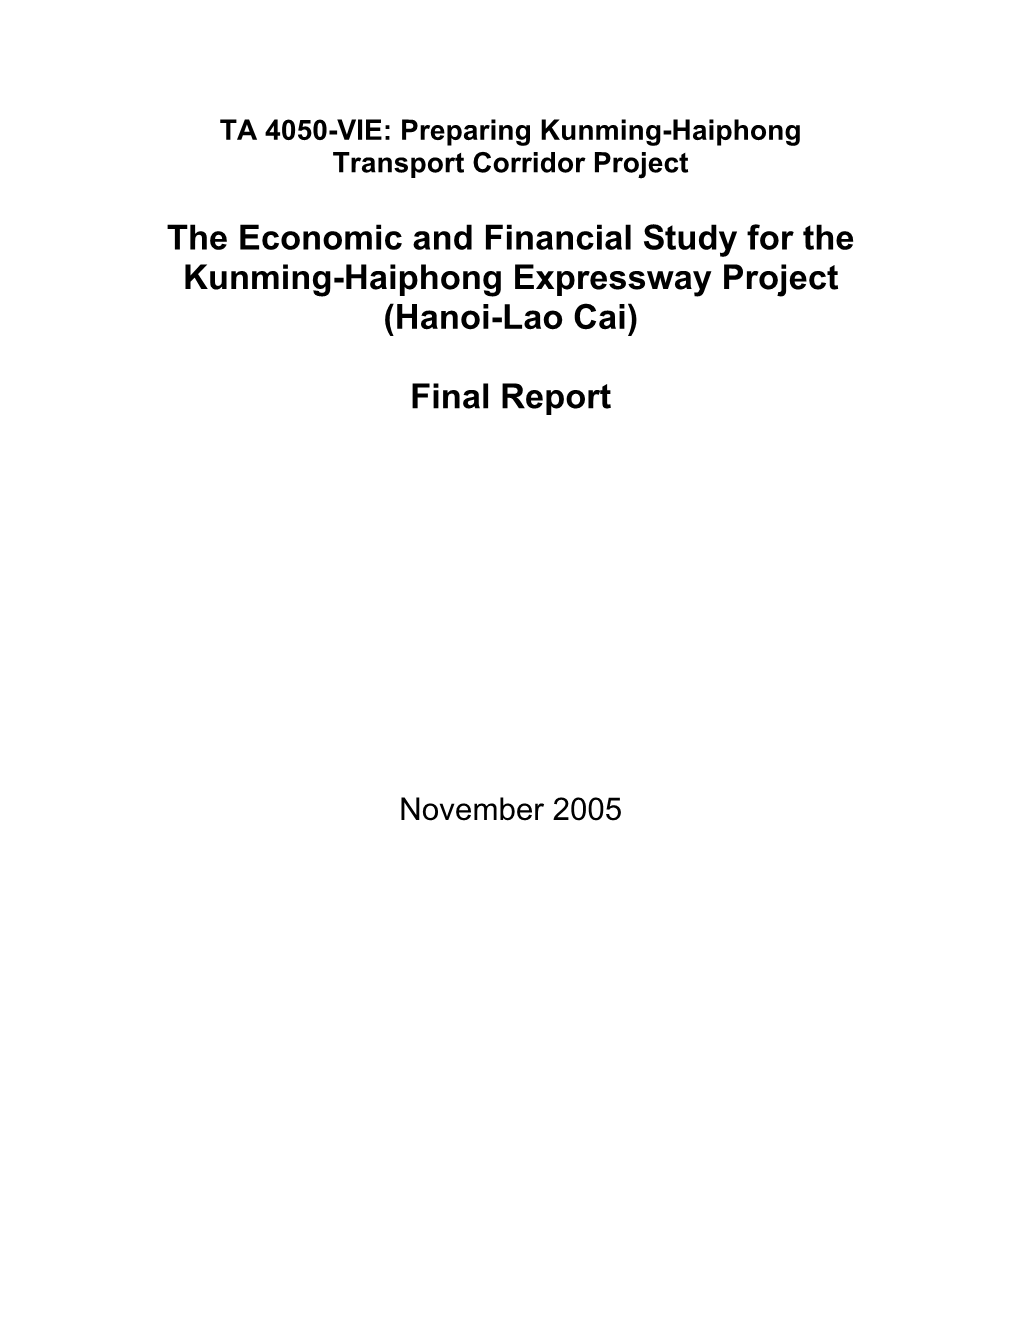 The Economic and Financial Study for the Kunming-Haiphong Expressway Project (Hanoi-Lao Cai)